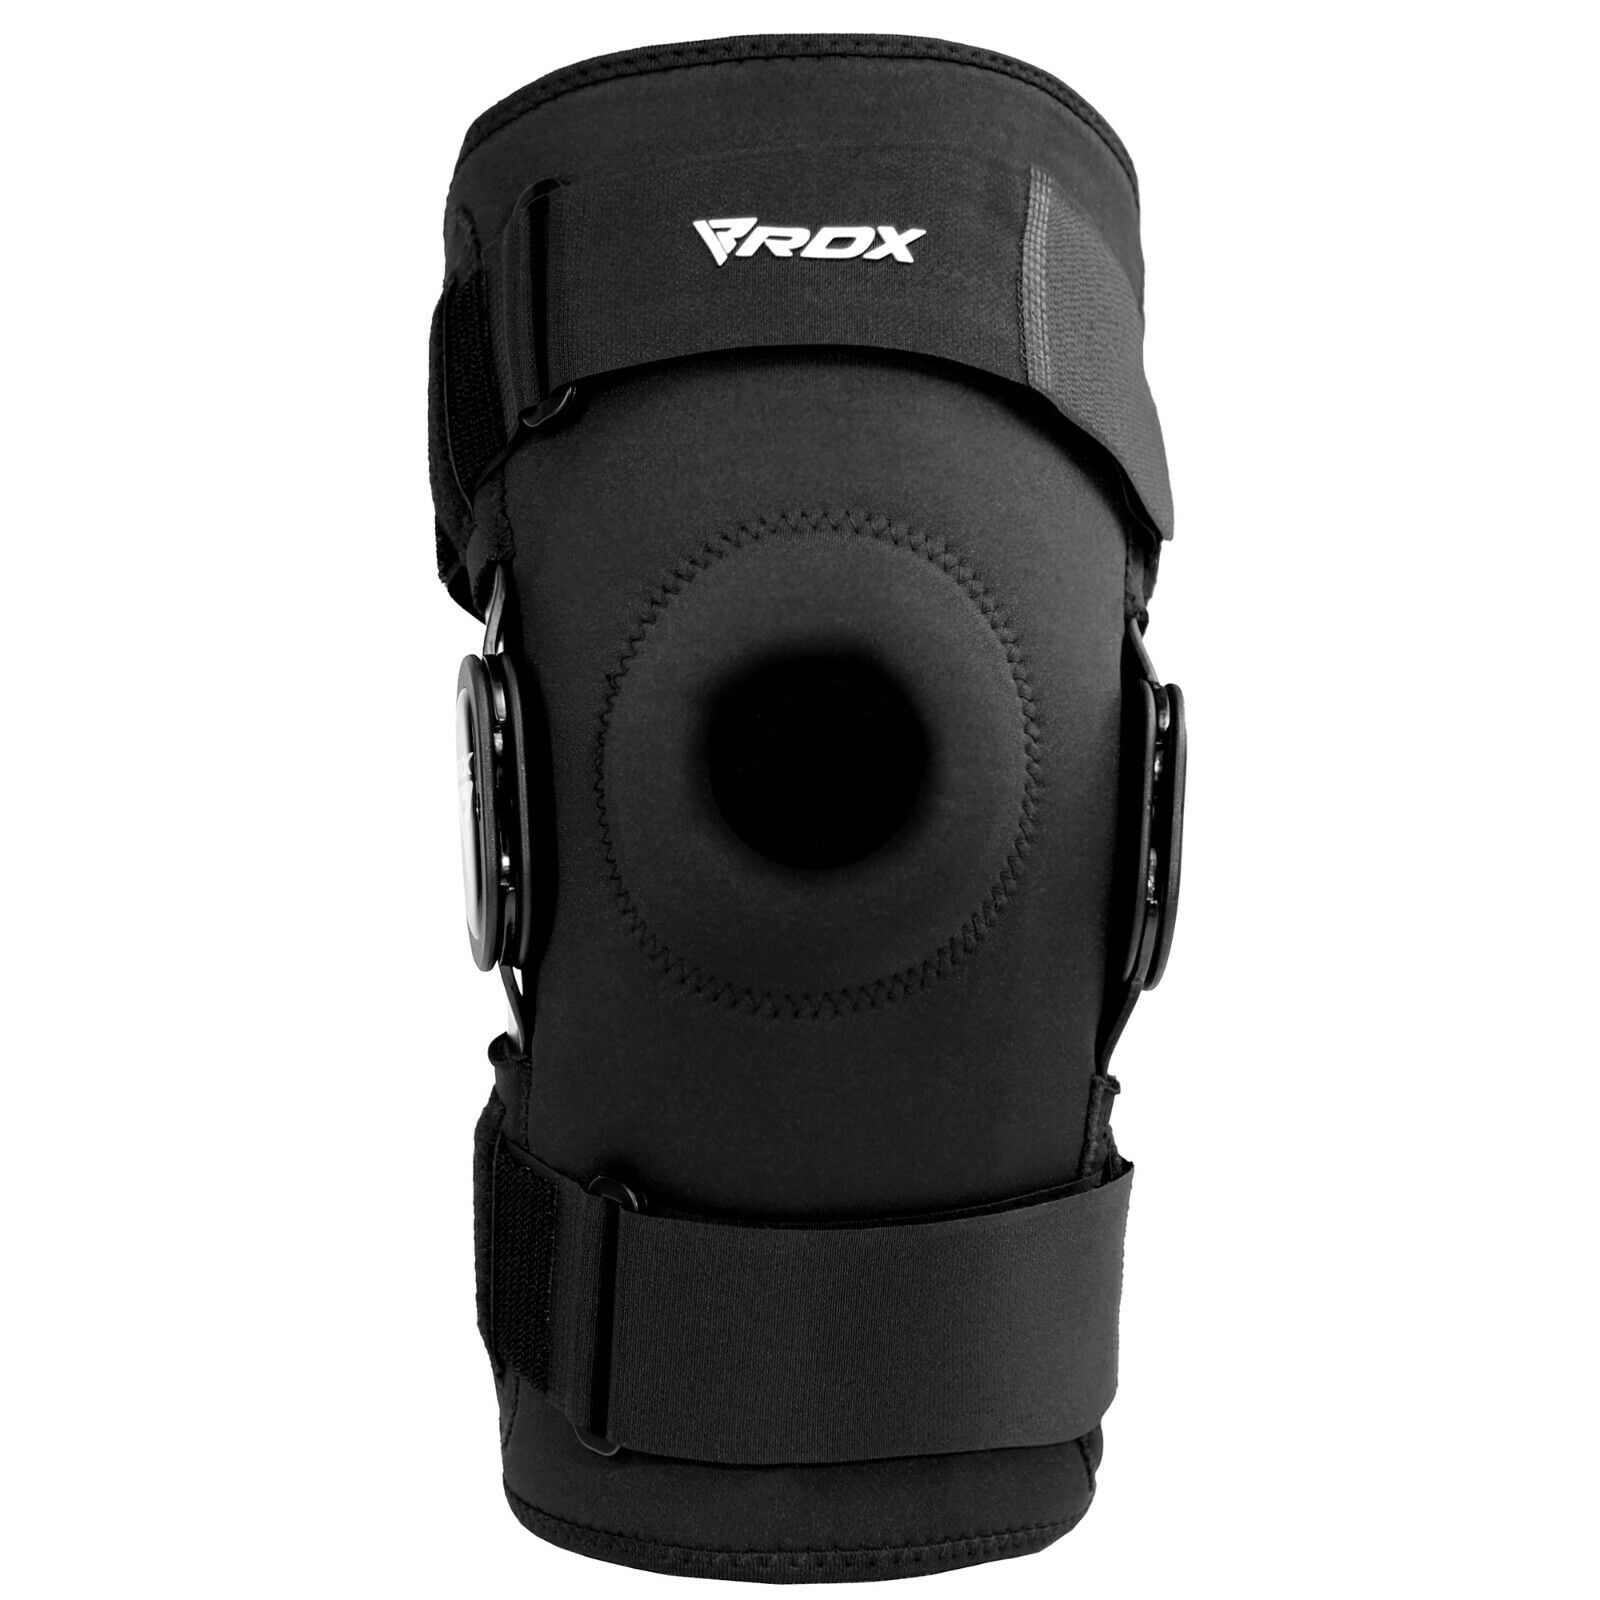 Rdx boxing sport fitness mma knee support ligament knee fr 